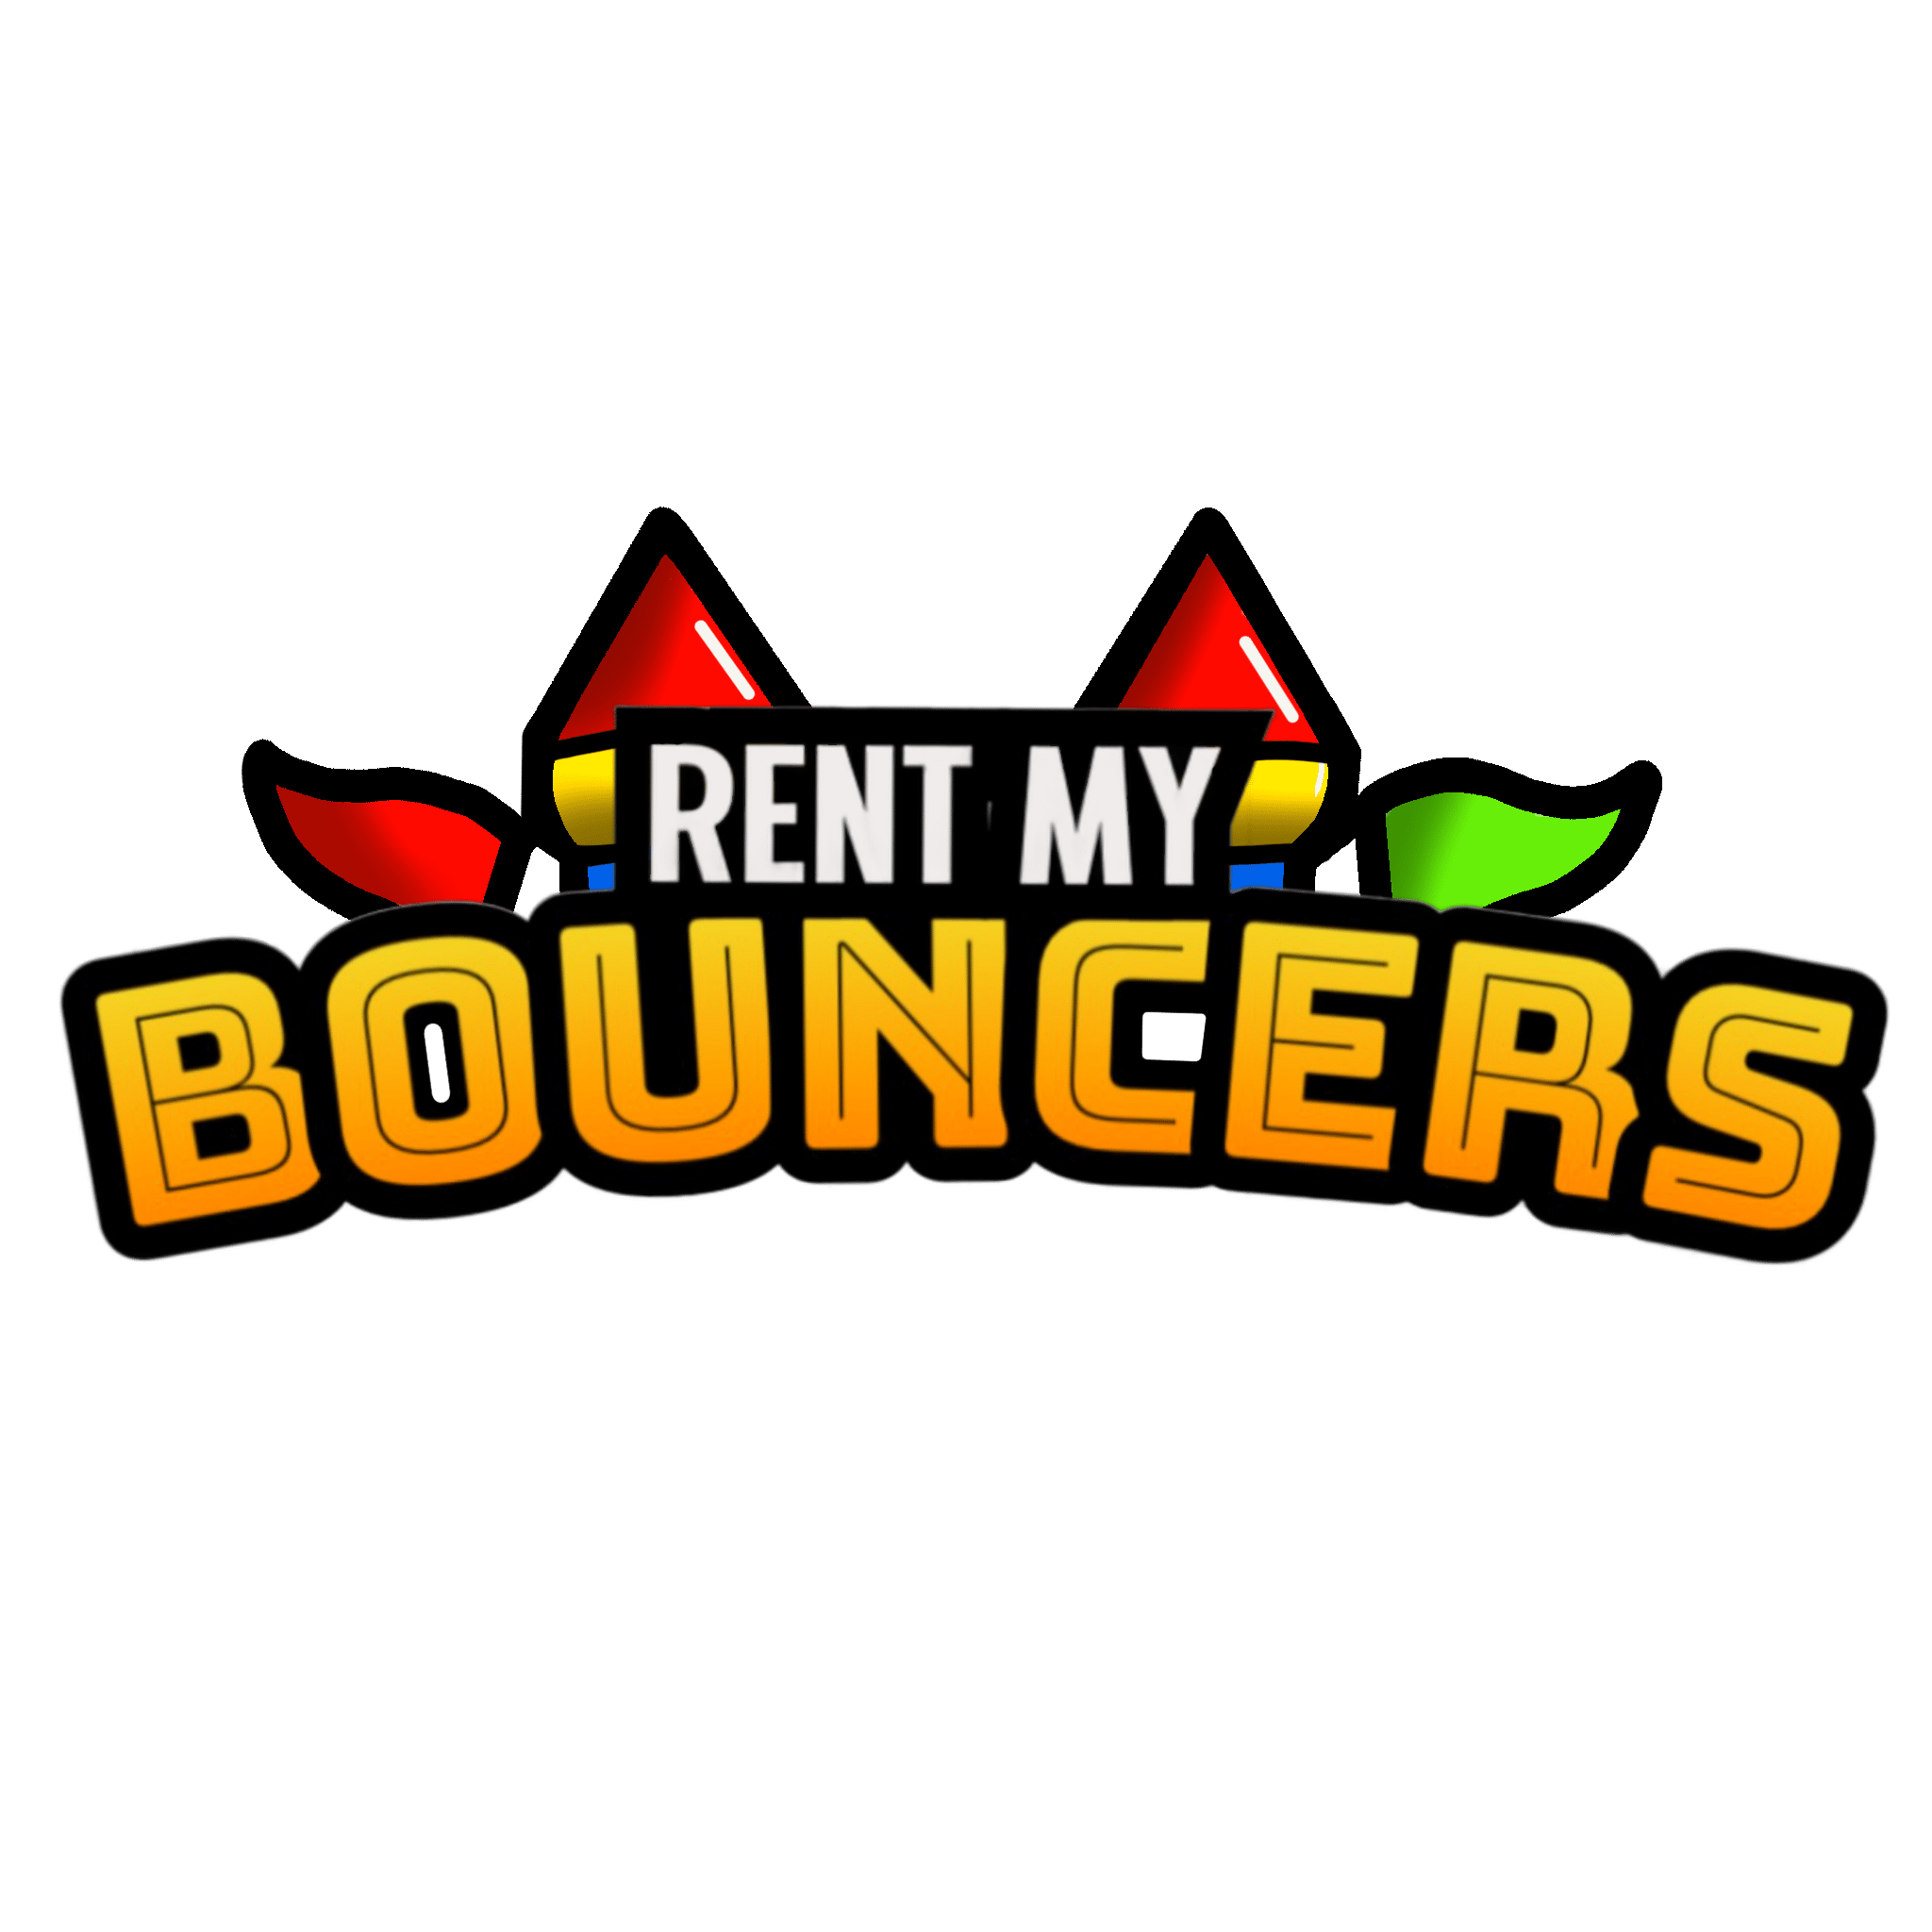 Rent my Bouncers